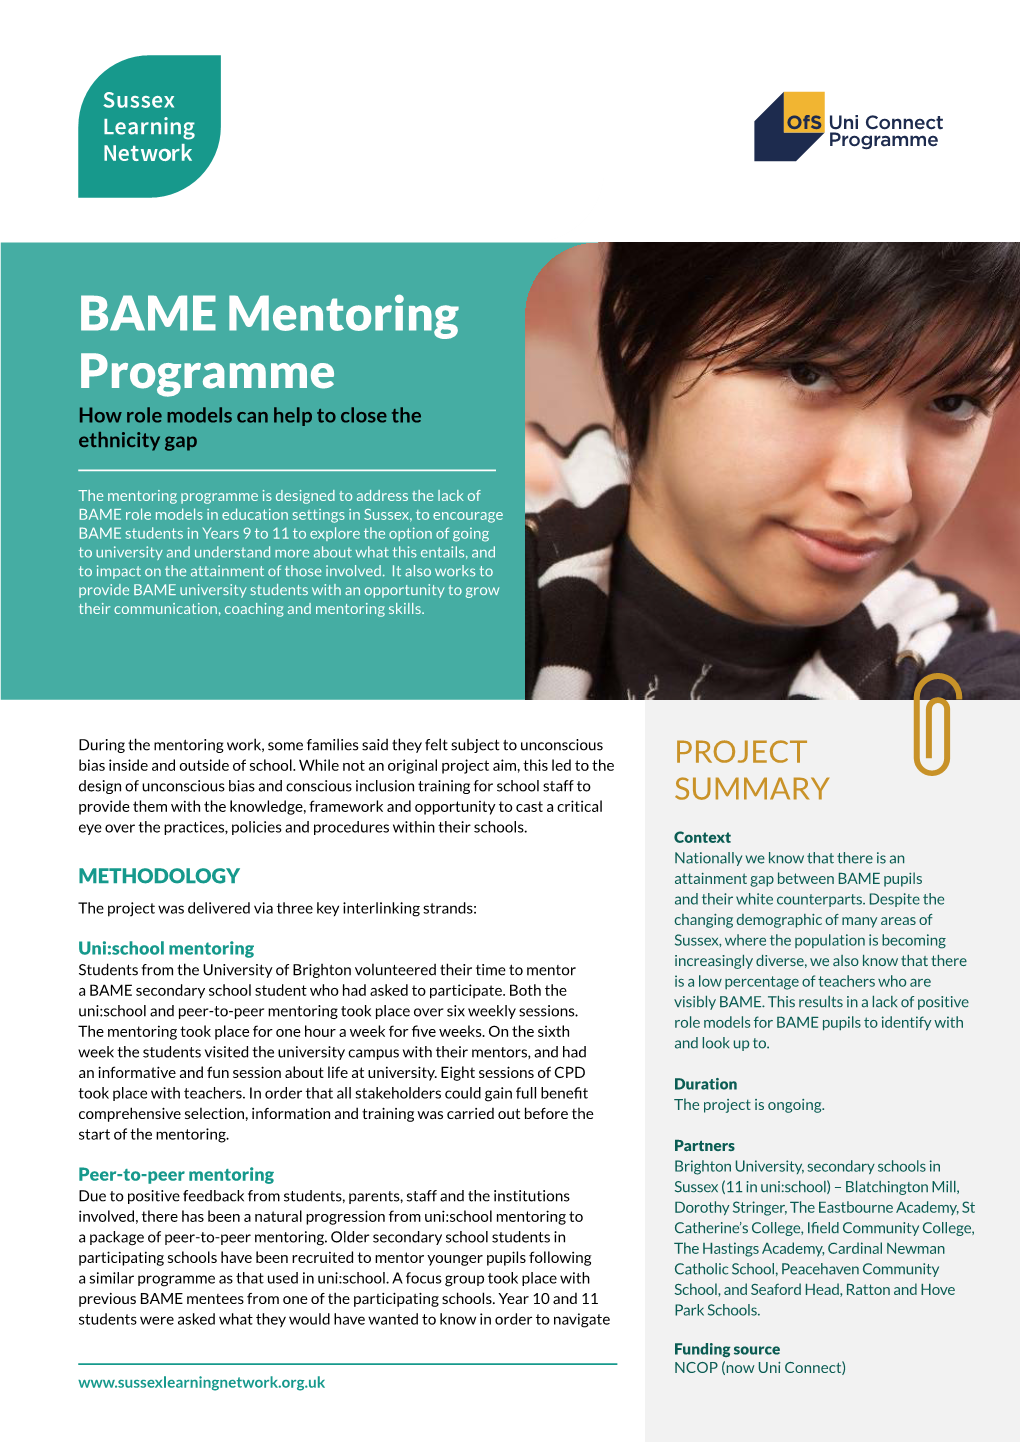 BAME Mentoring Programme How Role Models Can Help to Close the Ethnicity Gap